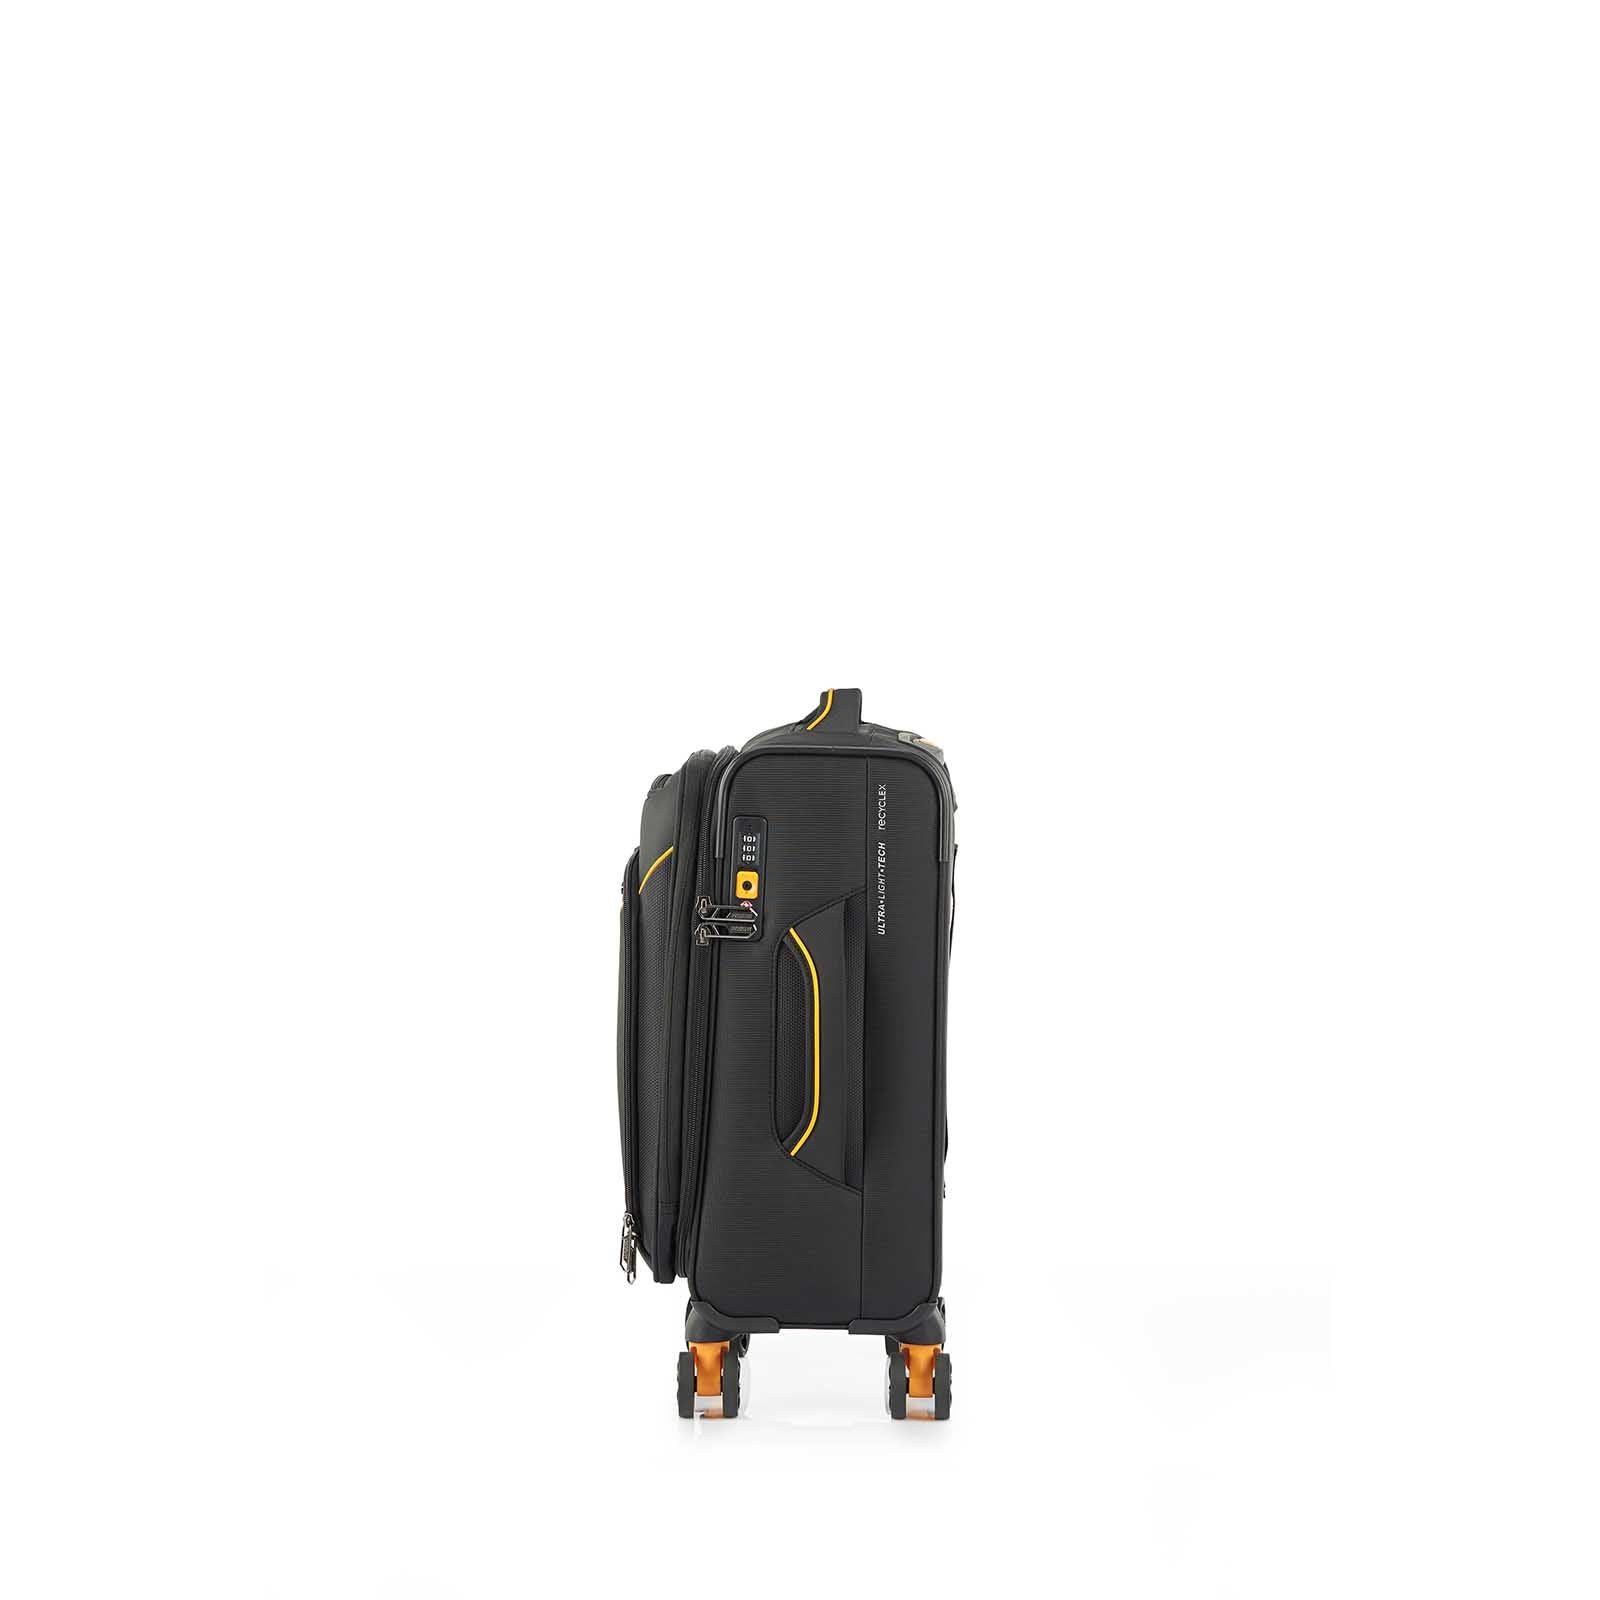 American-Tourister-Applite-4-Eco-55cm-Carry-On-Suitcase-Black-Mustard-Side-Handle